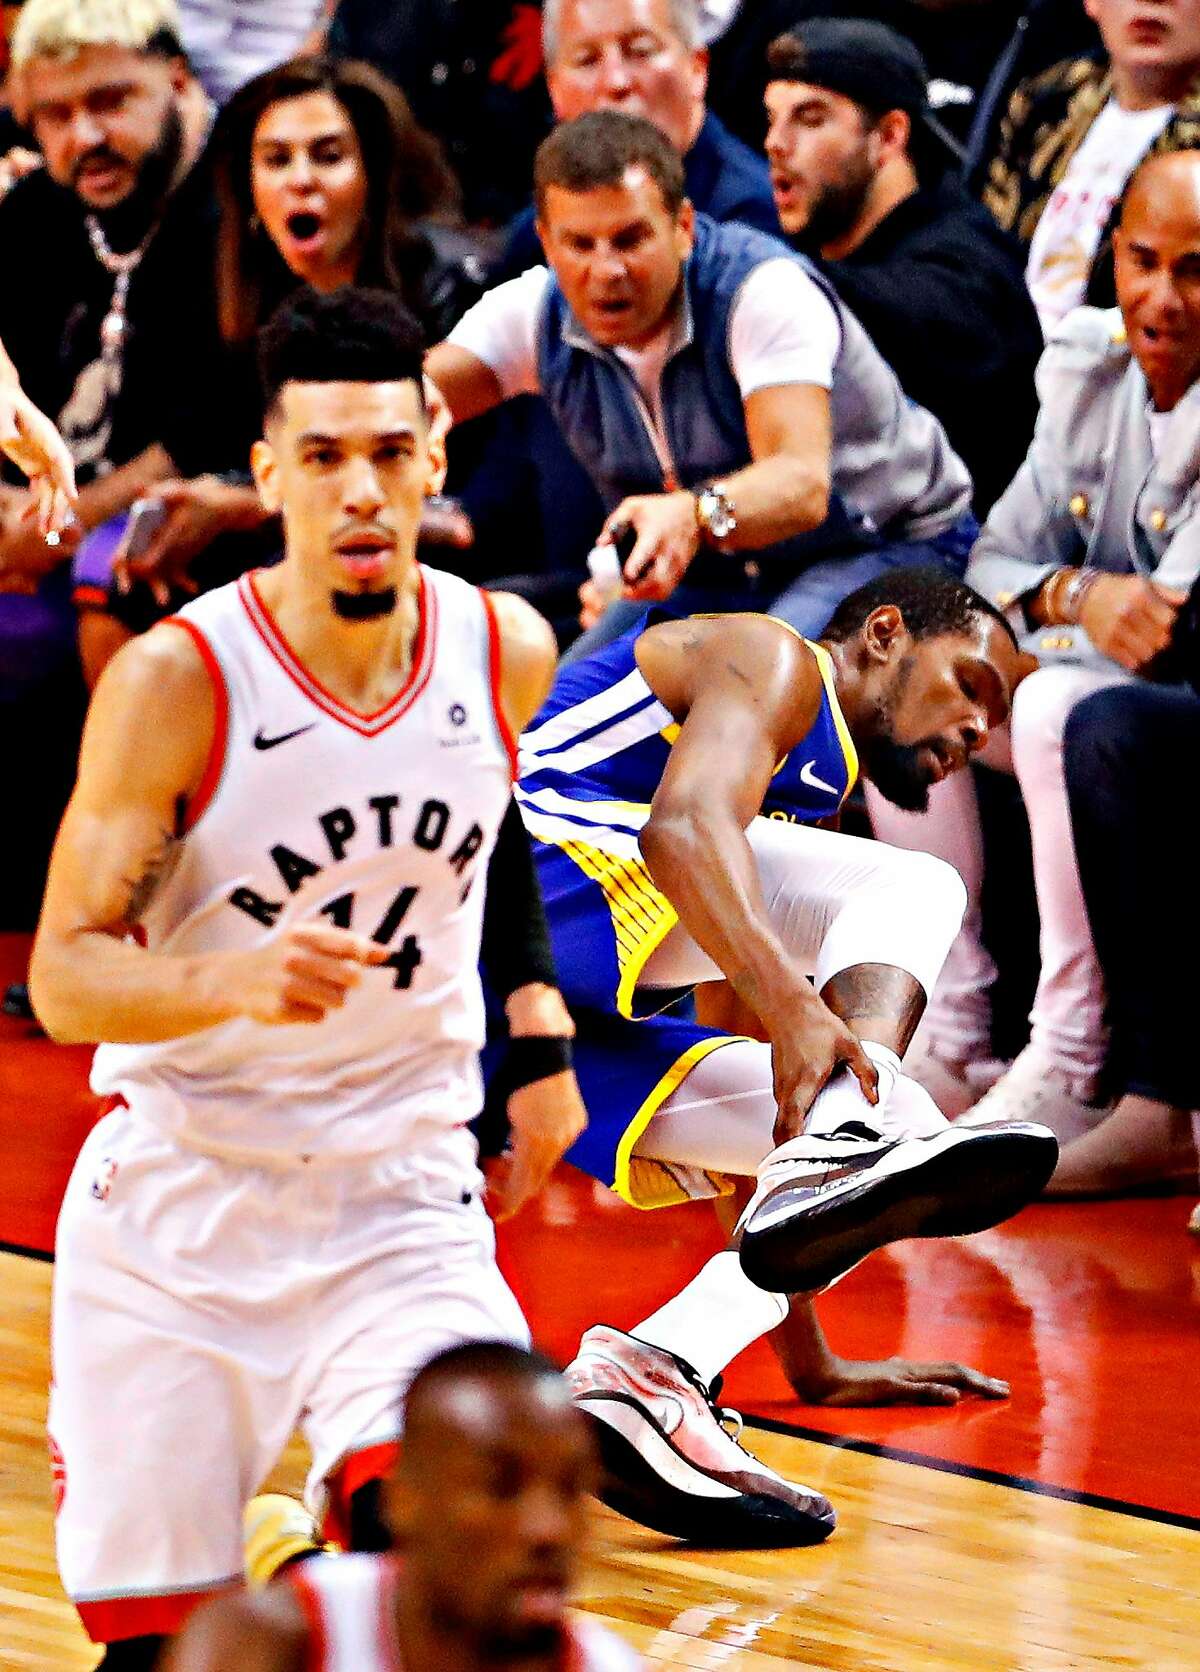 Golden State Warriors' Kevin Durant suffers an achilles injury during Warriors' 106-105 win over Toronto Raptors in NBA Finals' Game 5 at Scotiabank Arena in Toronto, Ontario, on Monday, June 10, 2019.